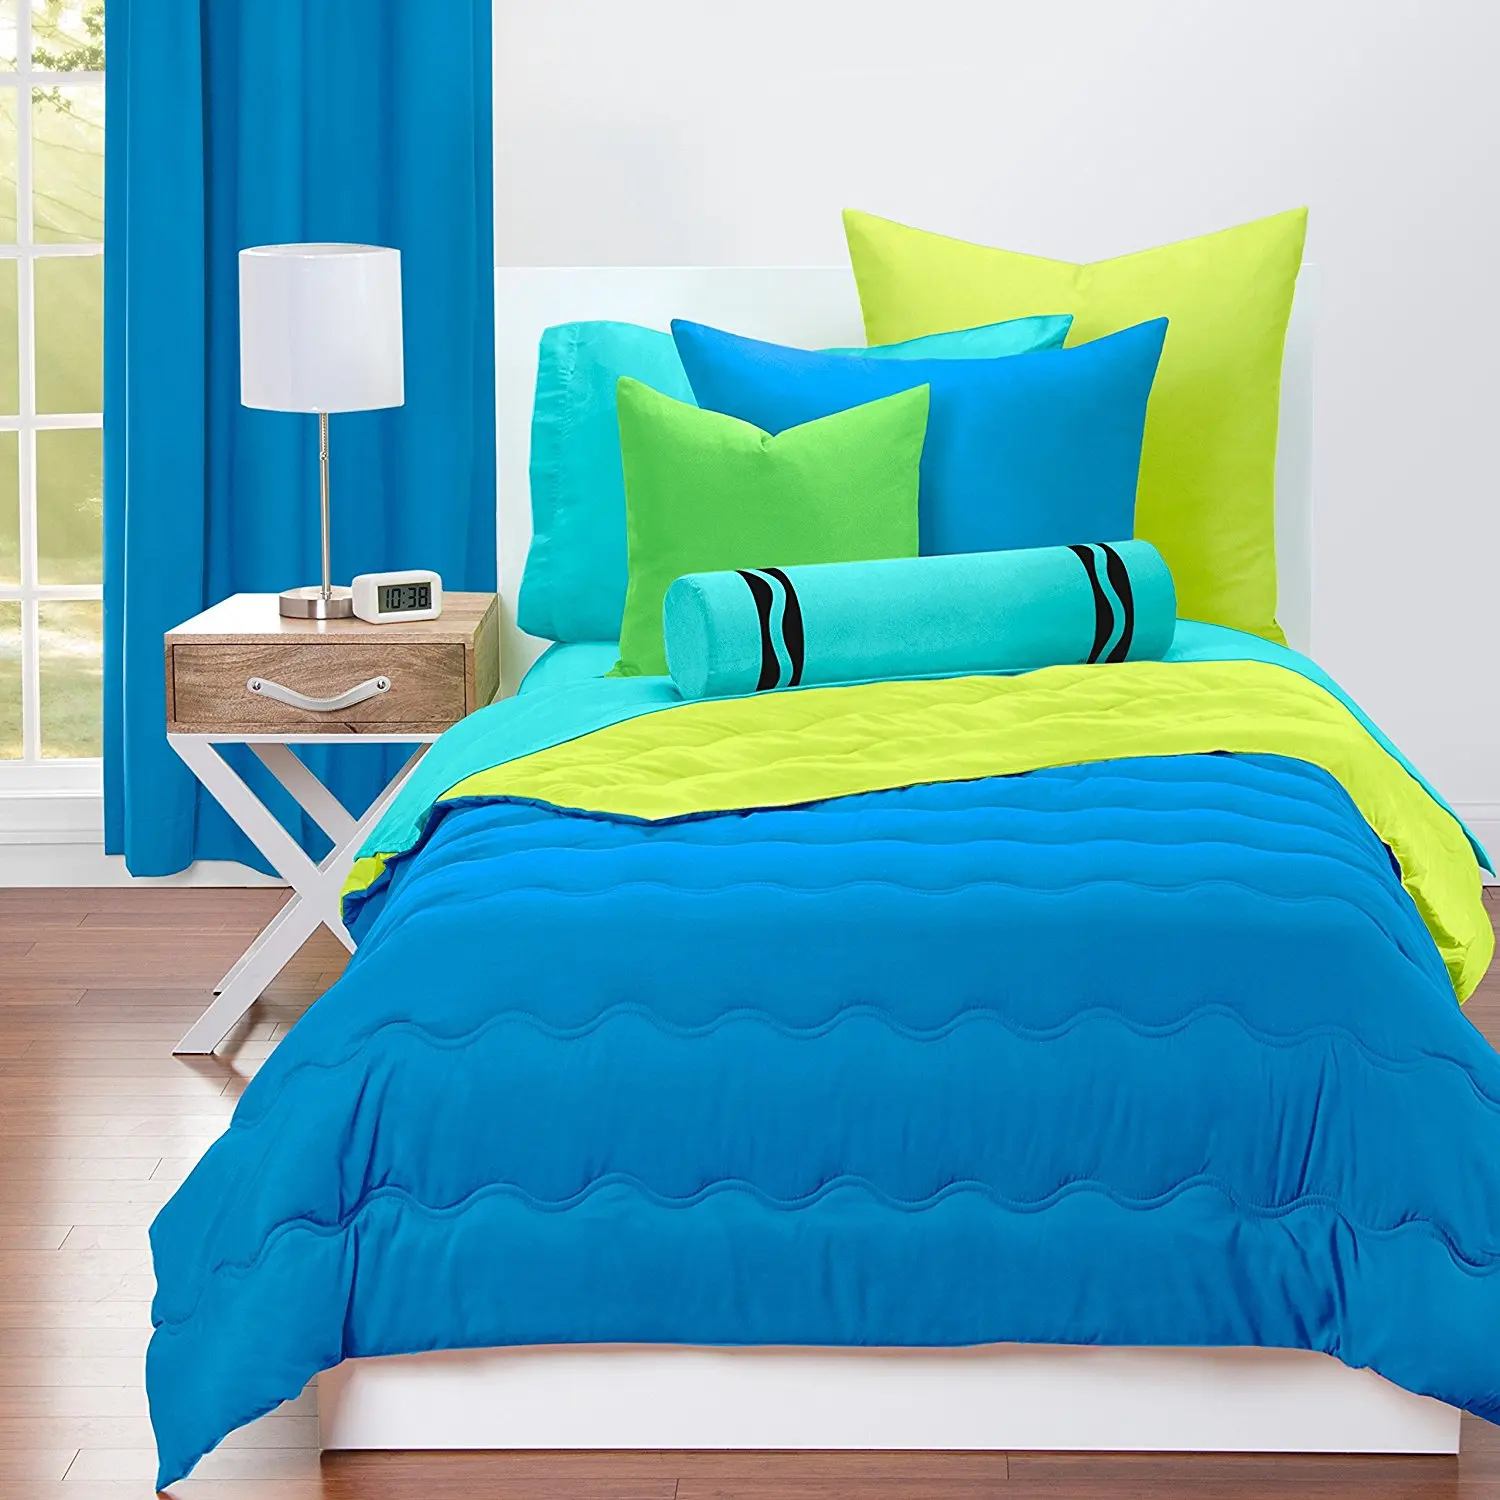 Cheap Solid Blue Twin Comforter, find Solid Blue Twin Comforter deals ...